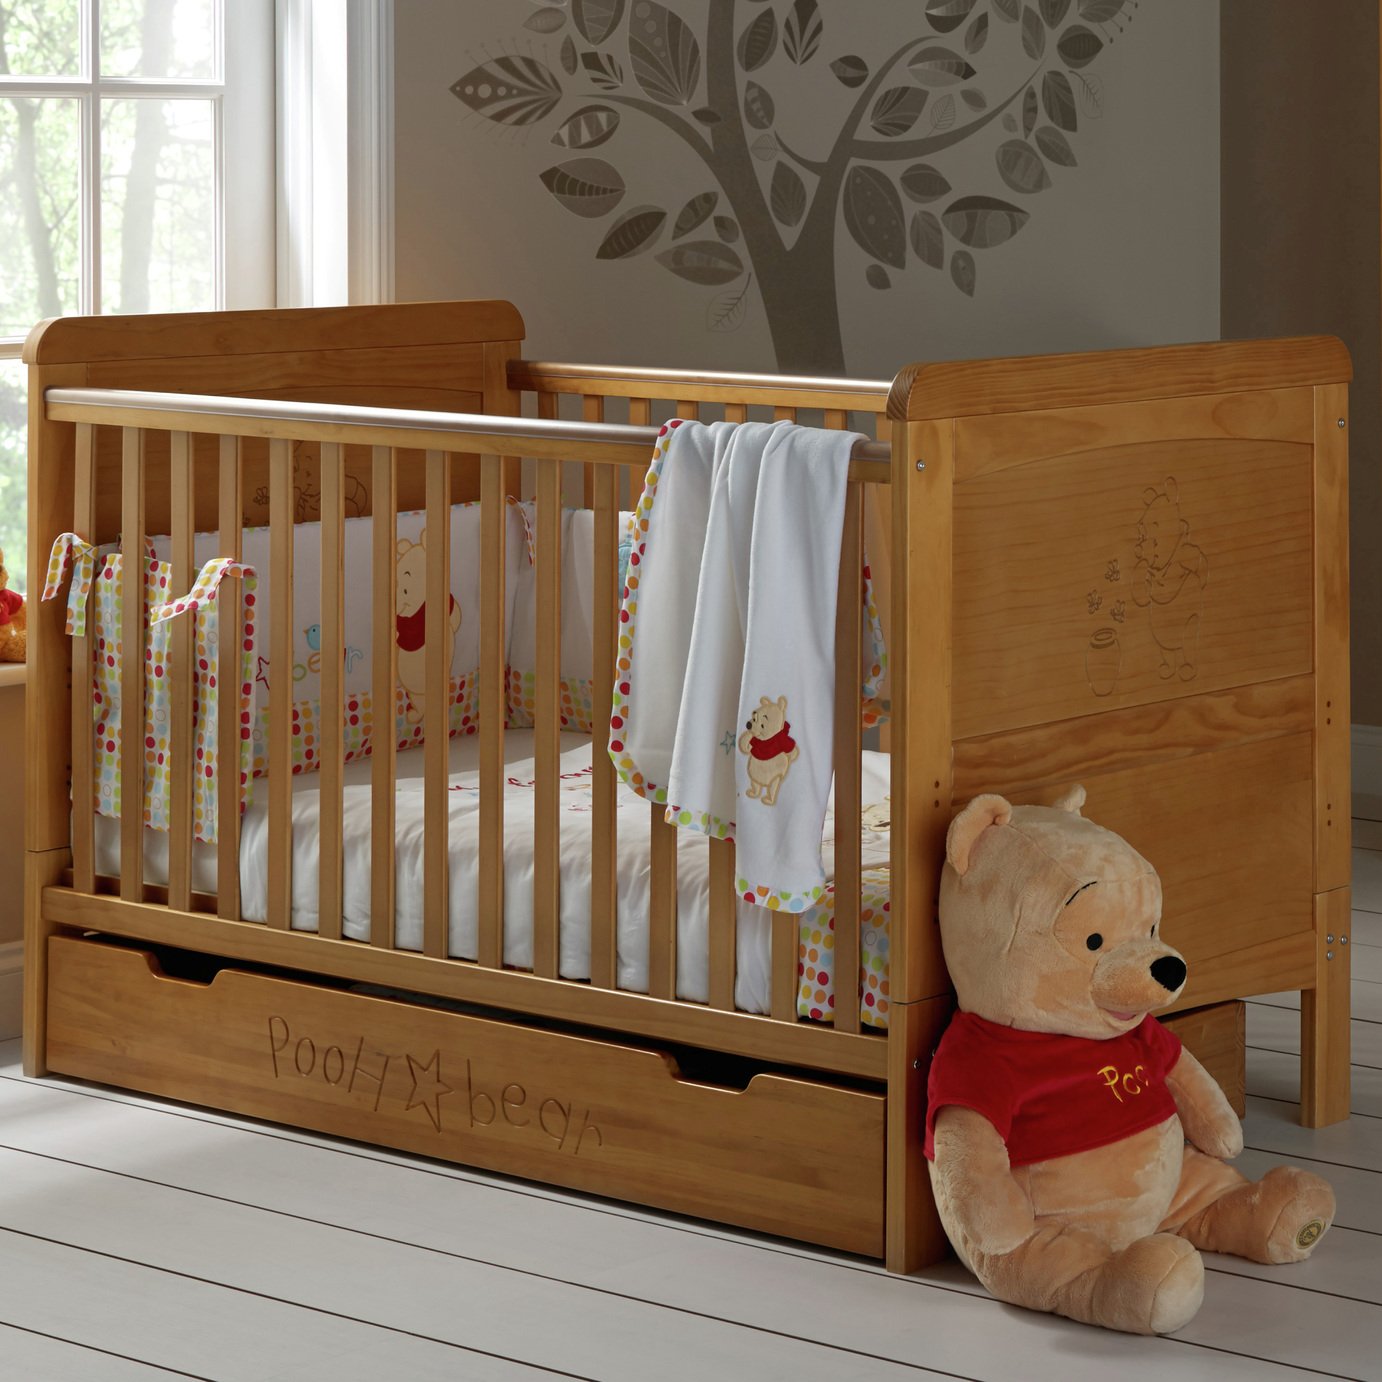 Disney Winnie The Pooh Cot Bed & Under Drawer review